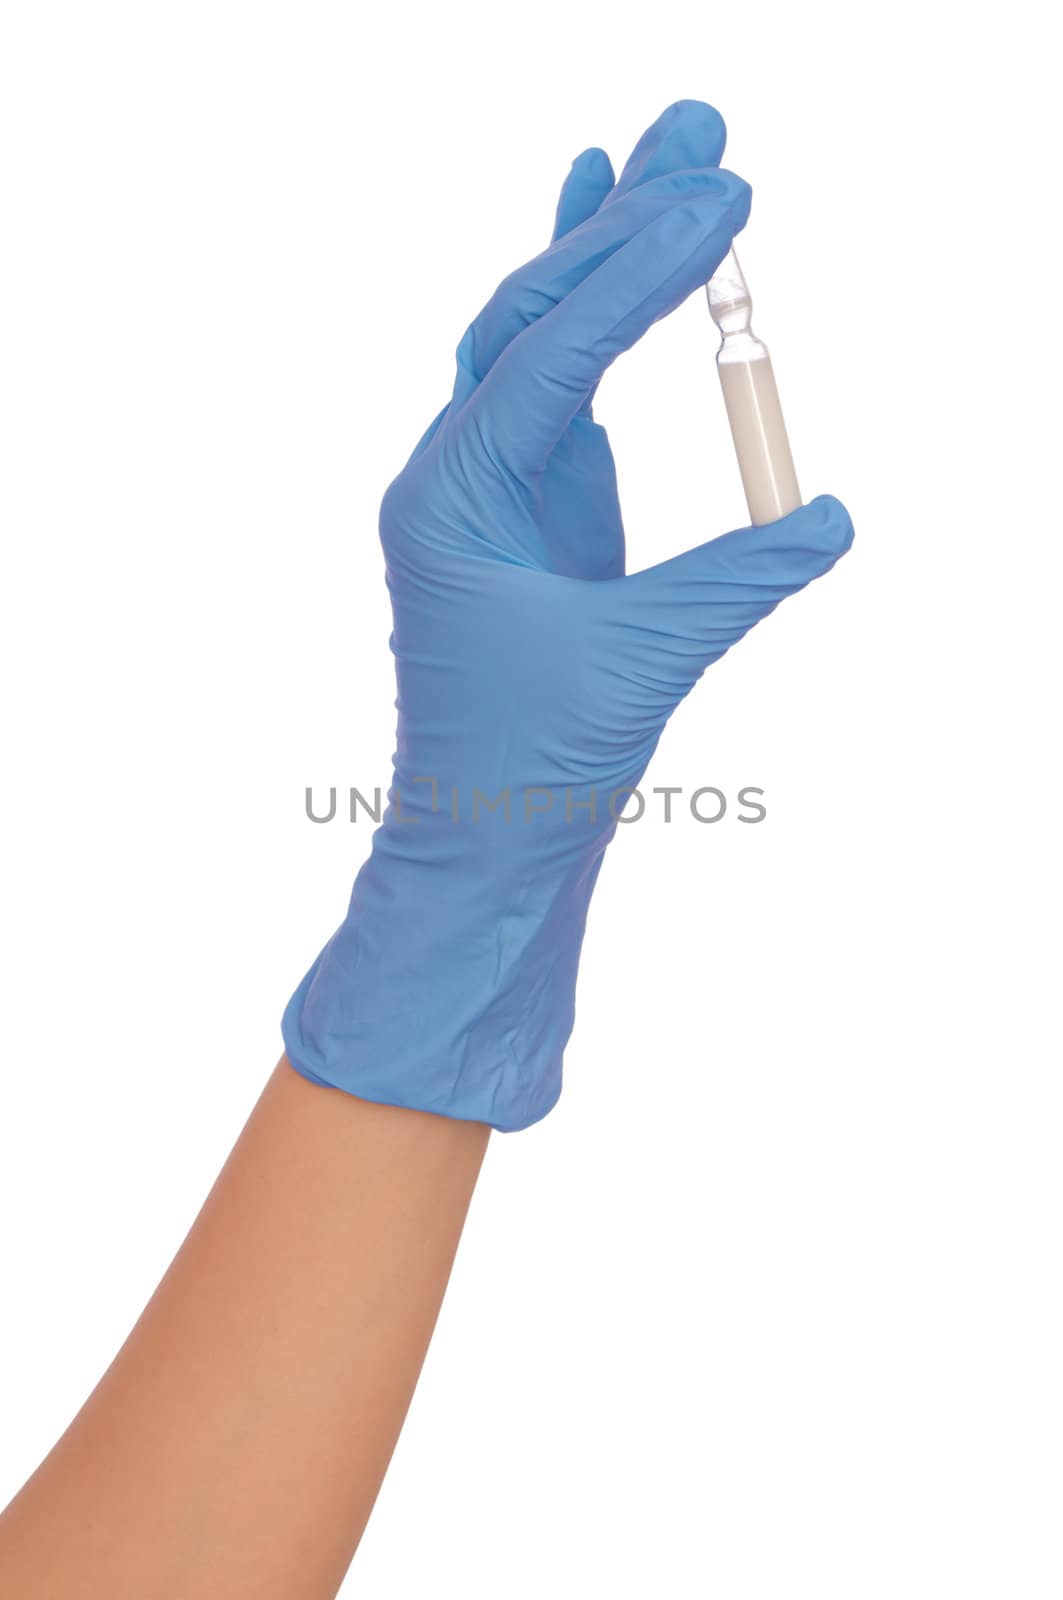 laboratory assistant takes one ampule for making a vaccination